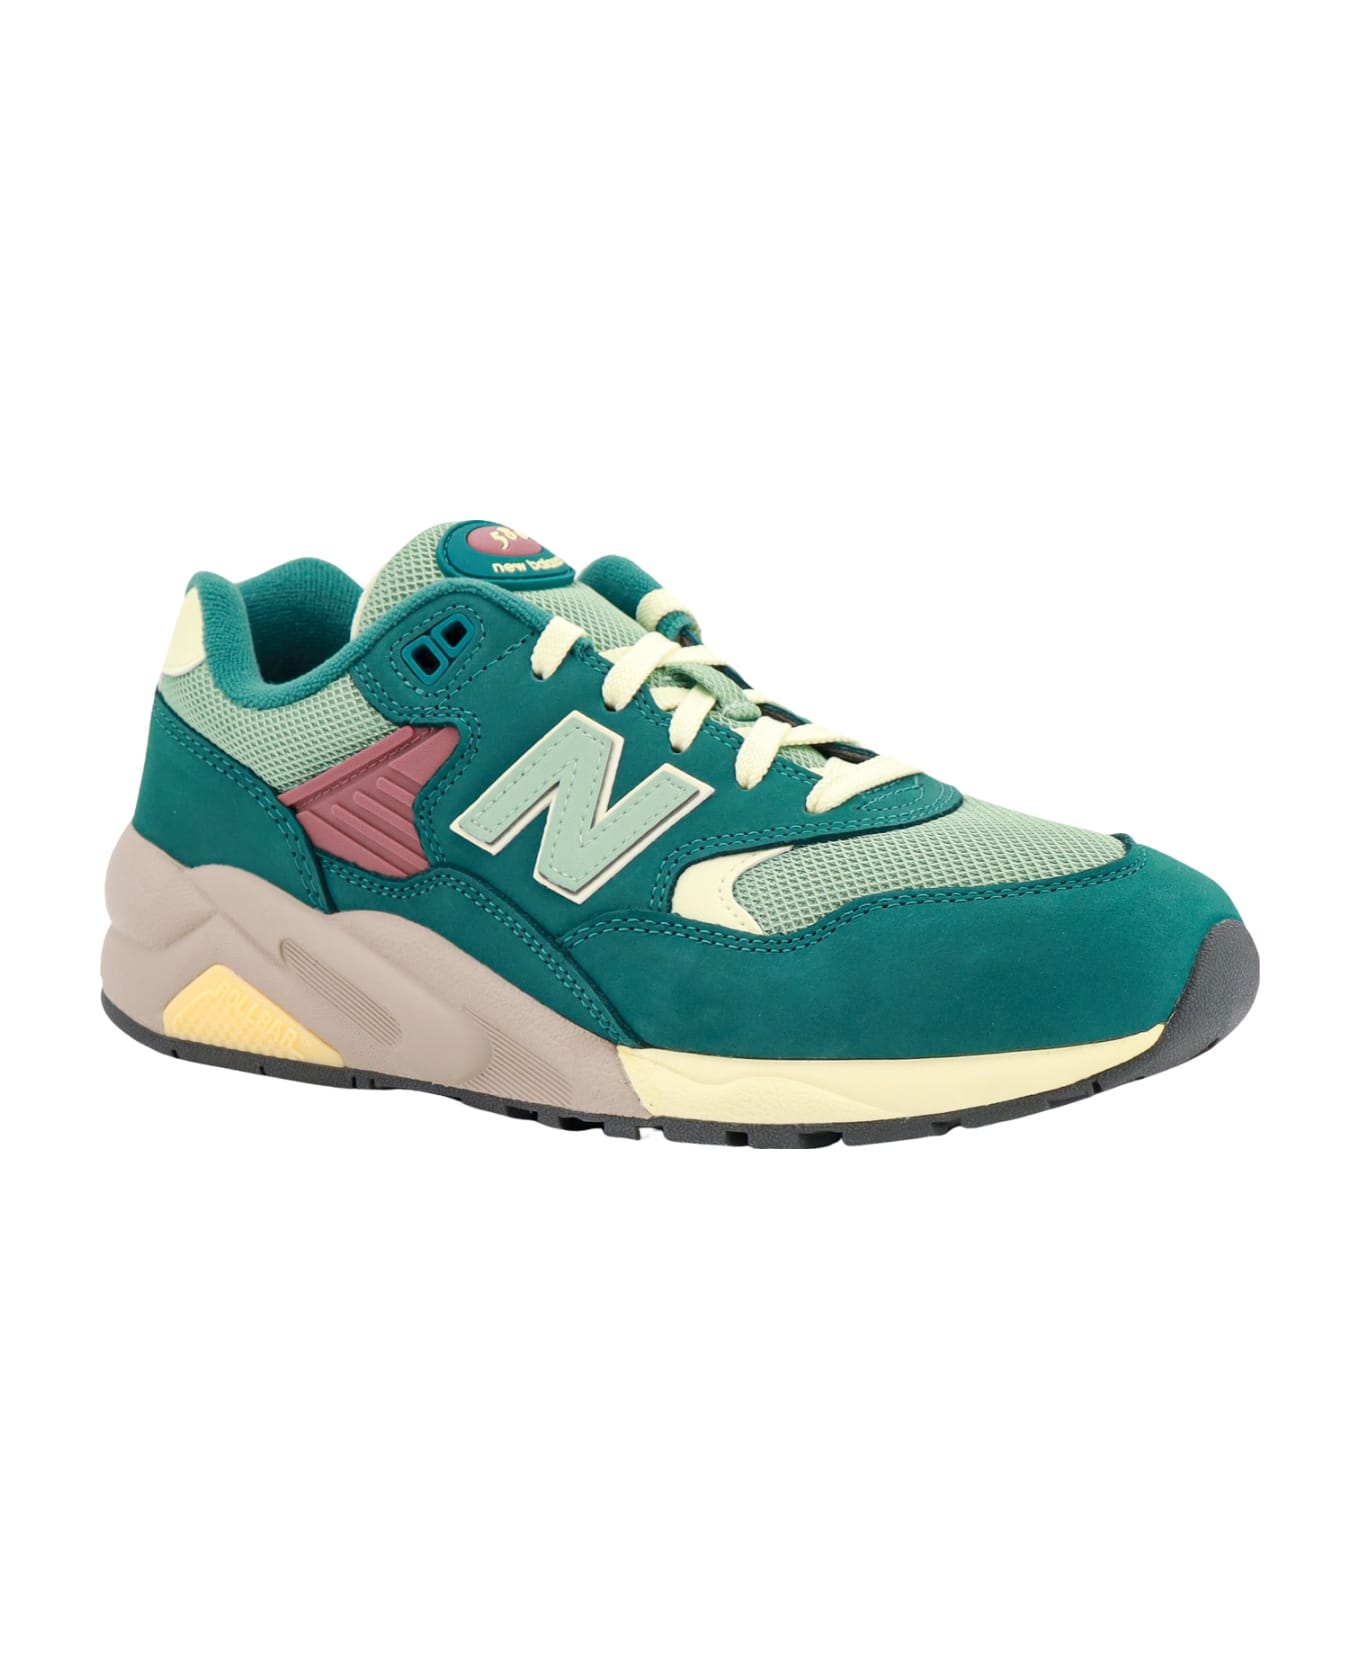 New Balance 580 Sneakers - Green